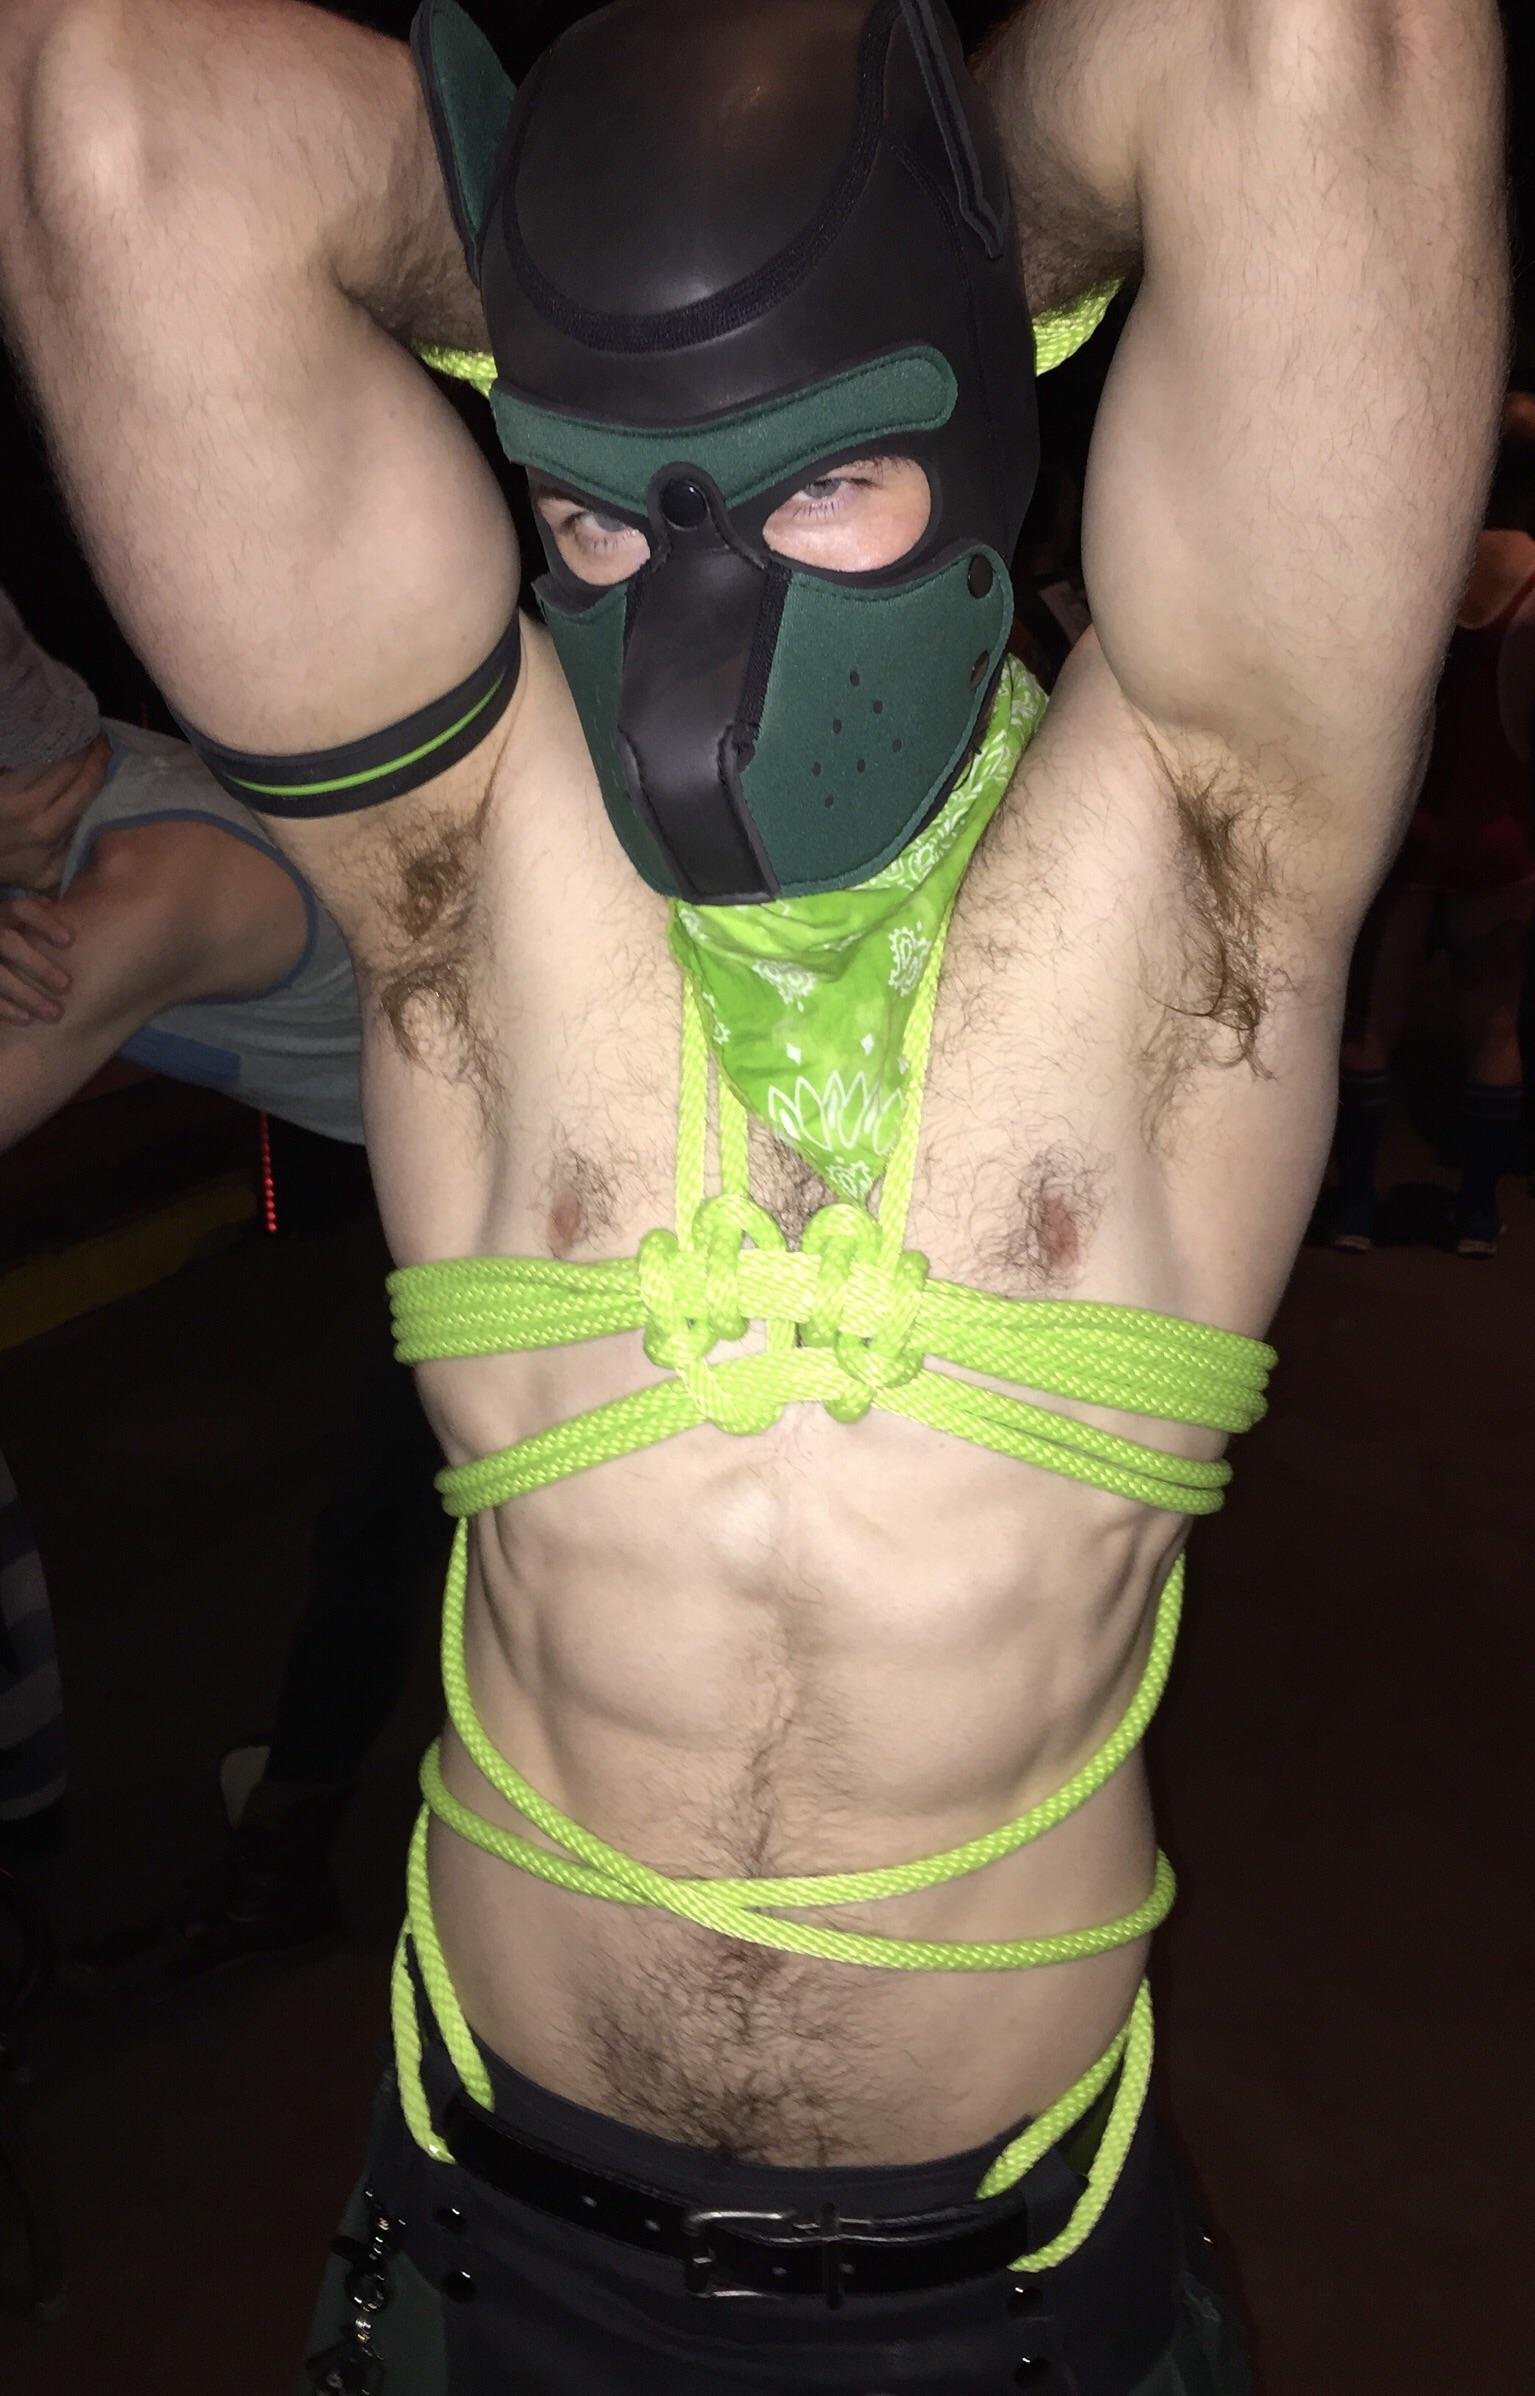 Just a cute rope puppy